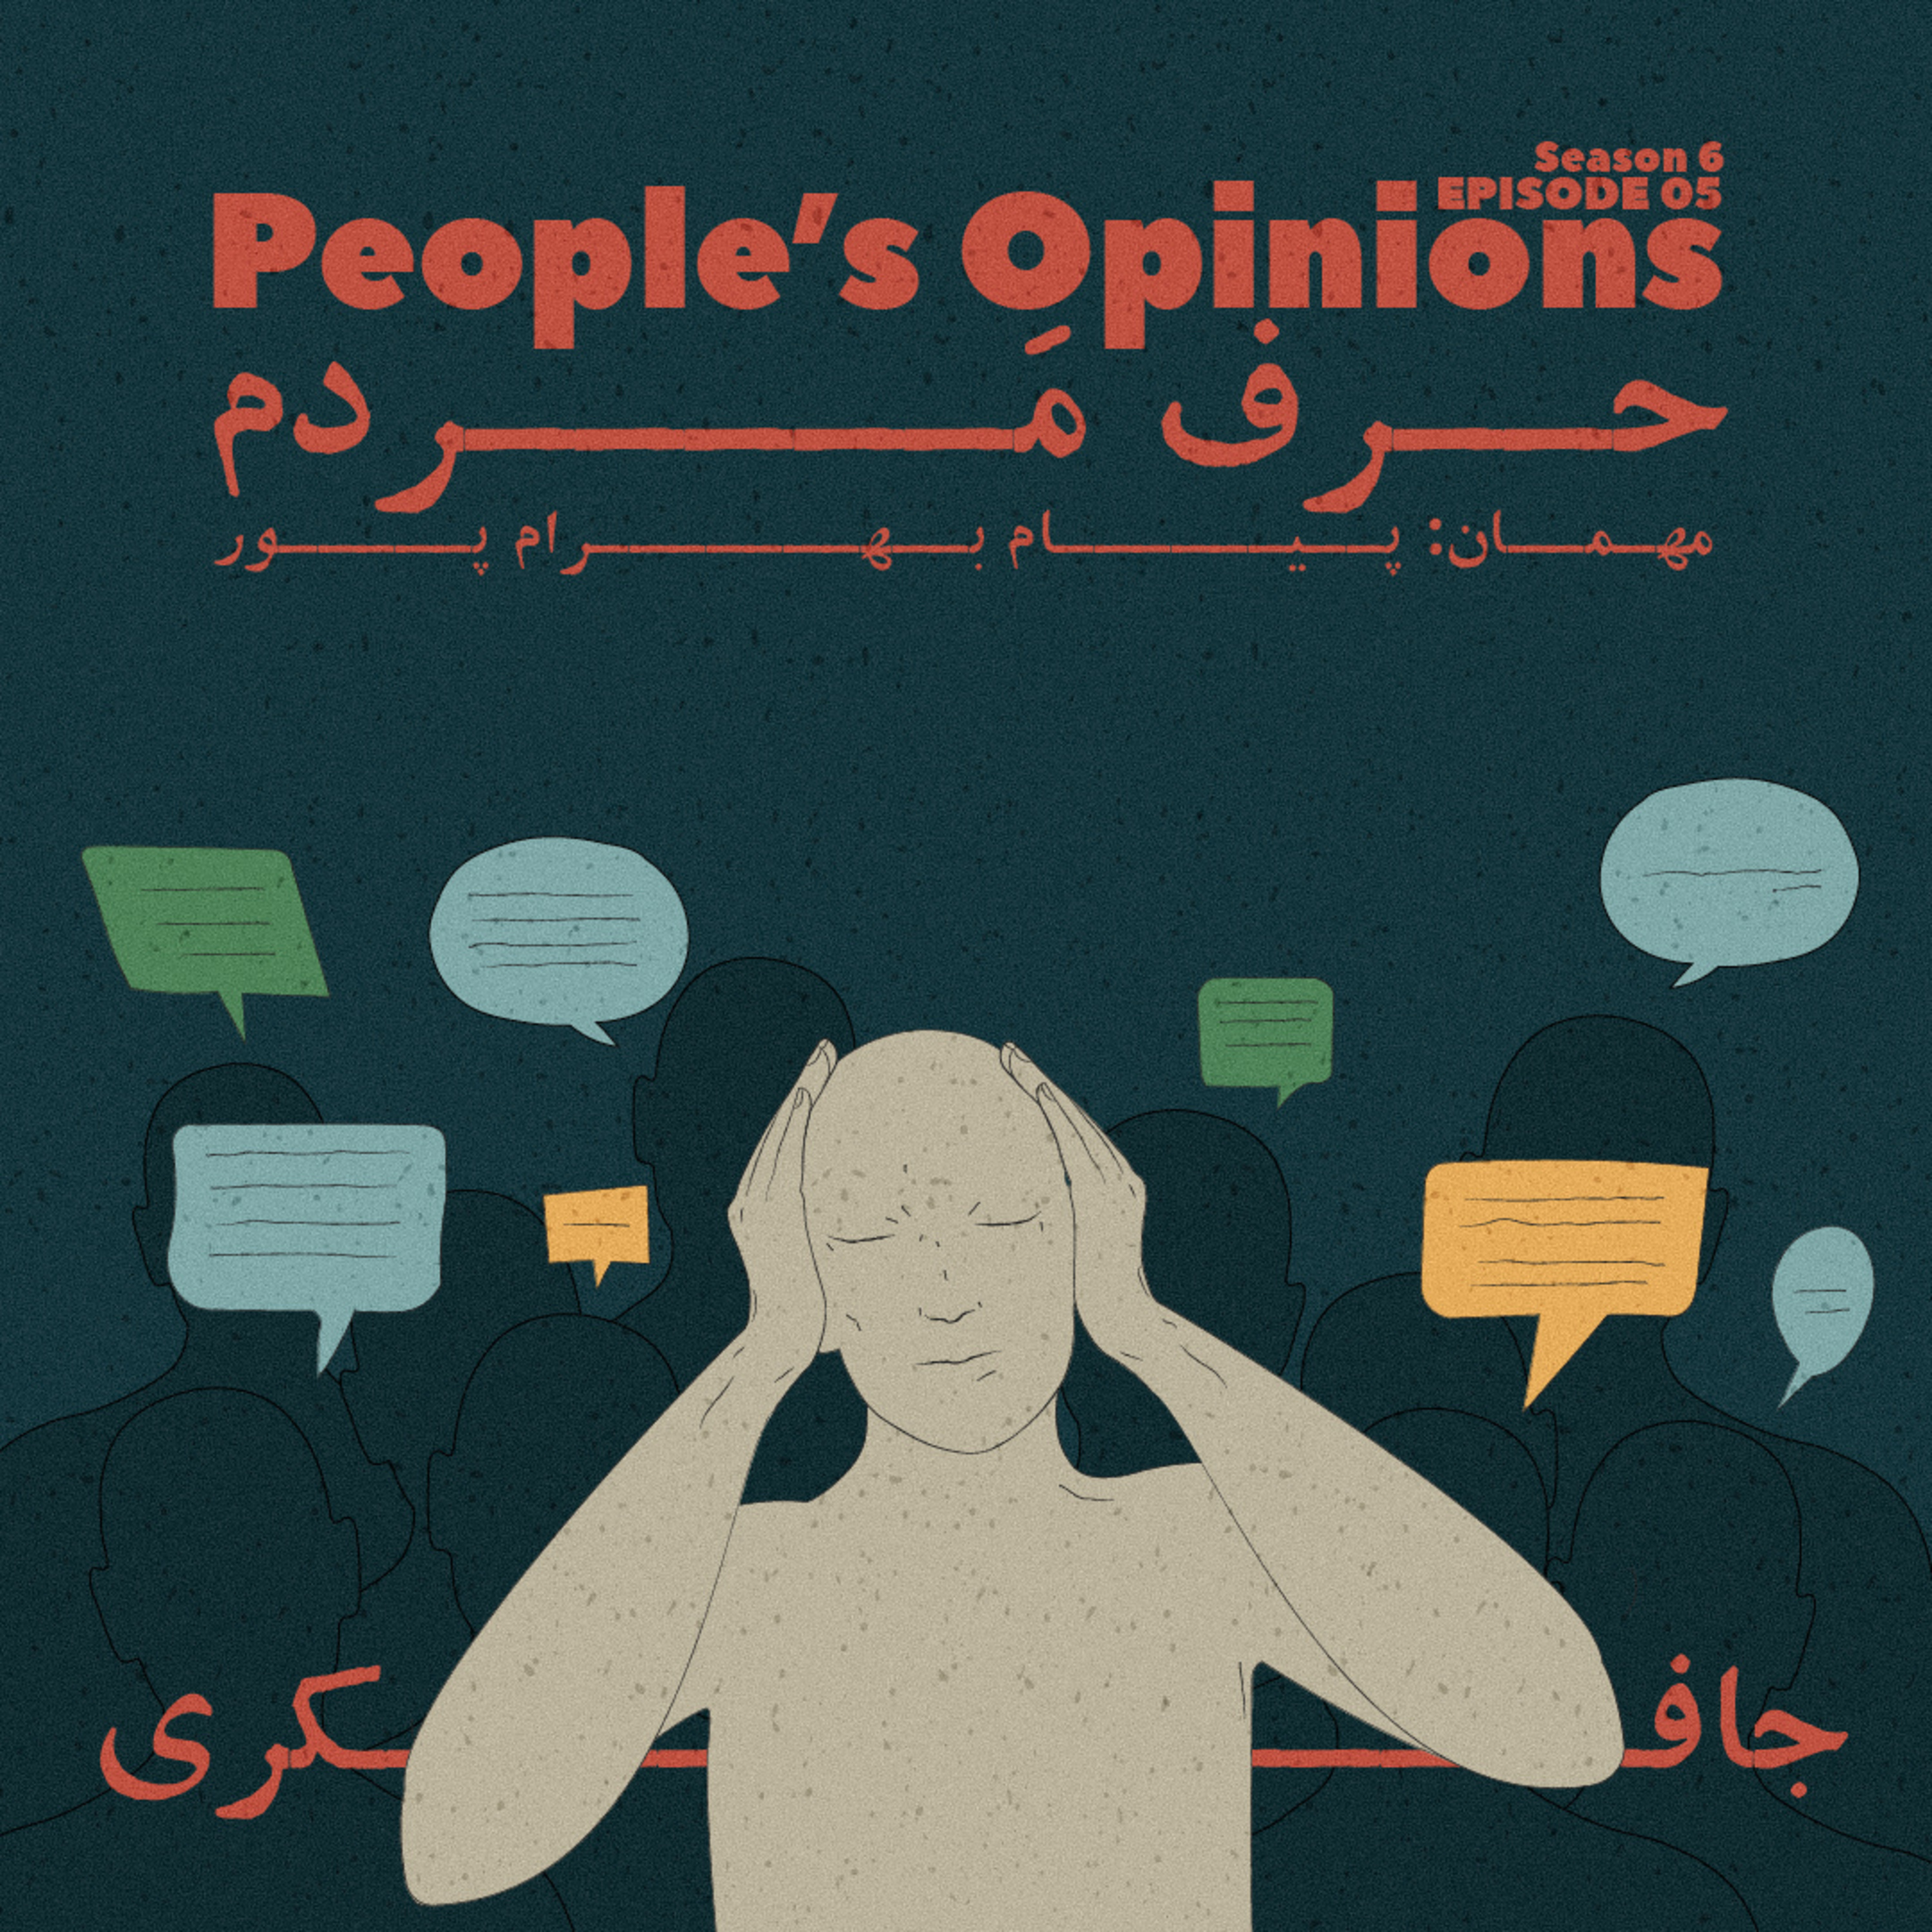 Episode 05 - People’s Opinions (حرف مردم)